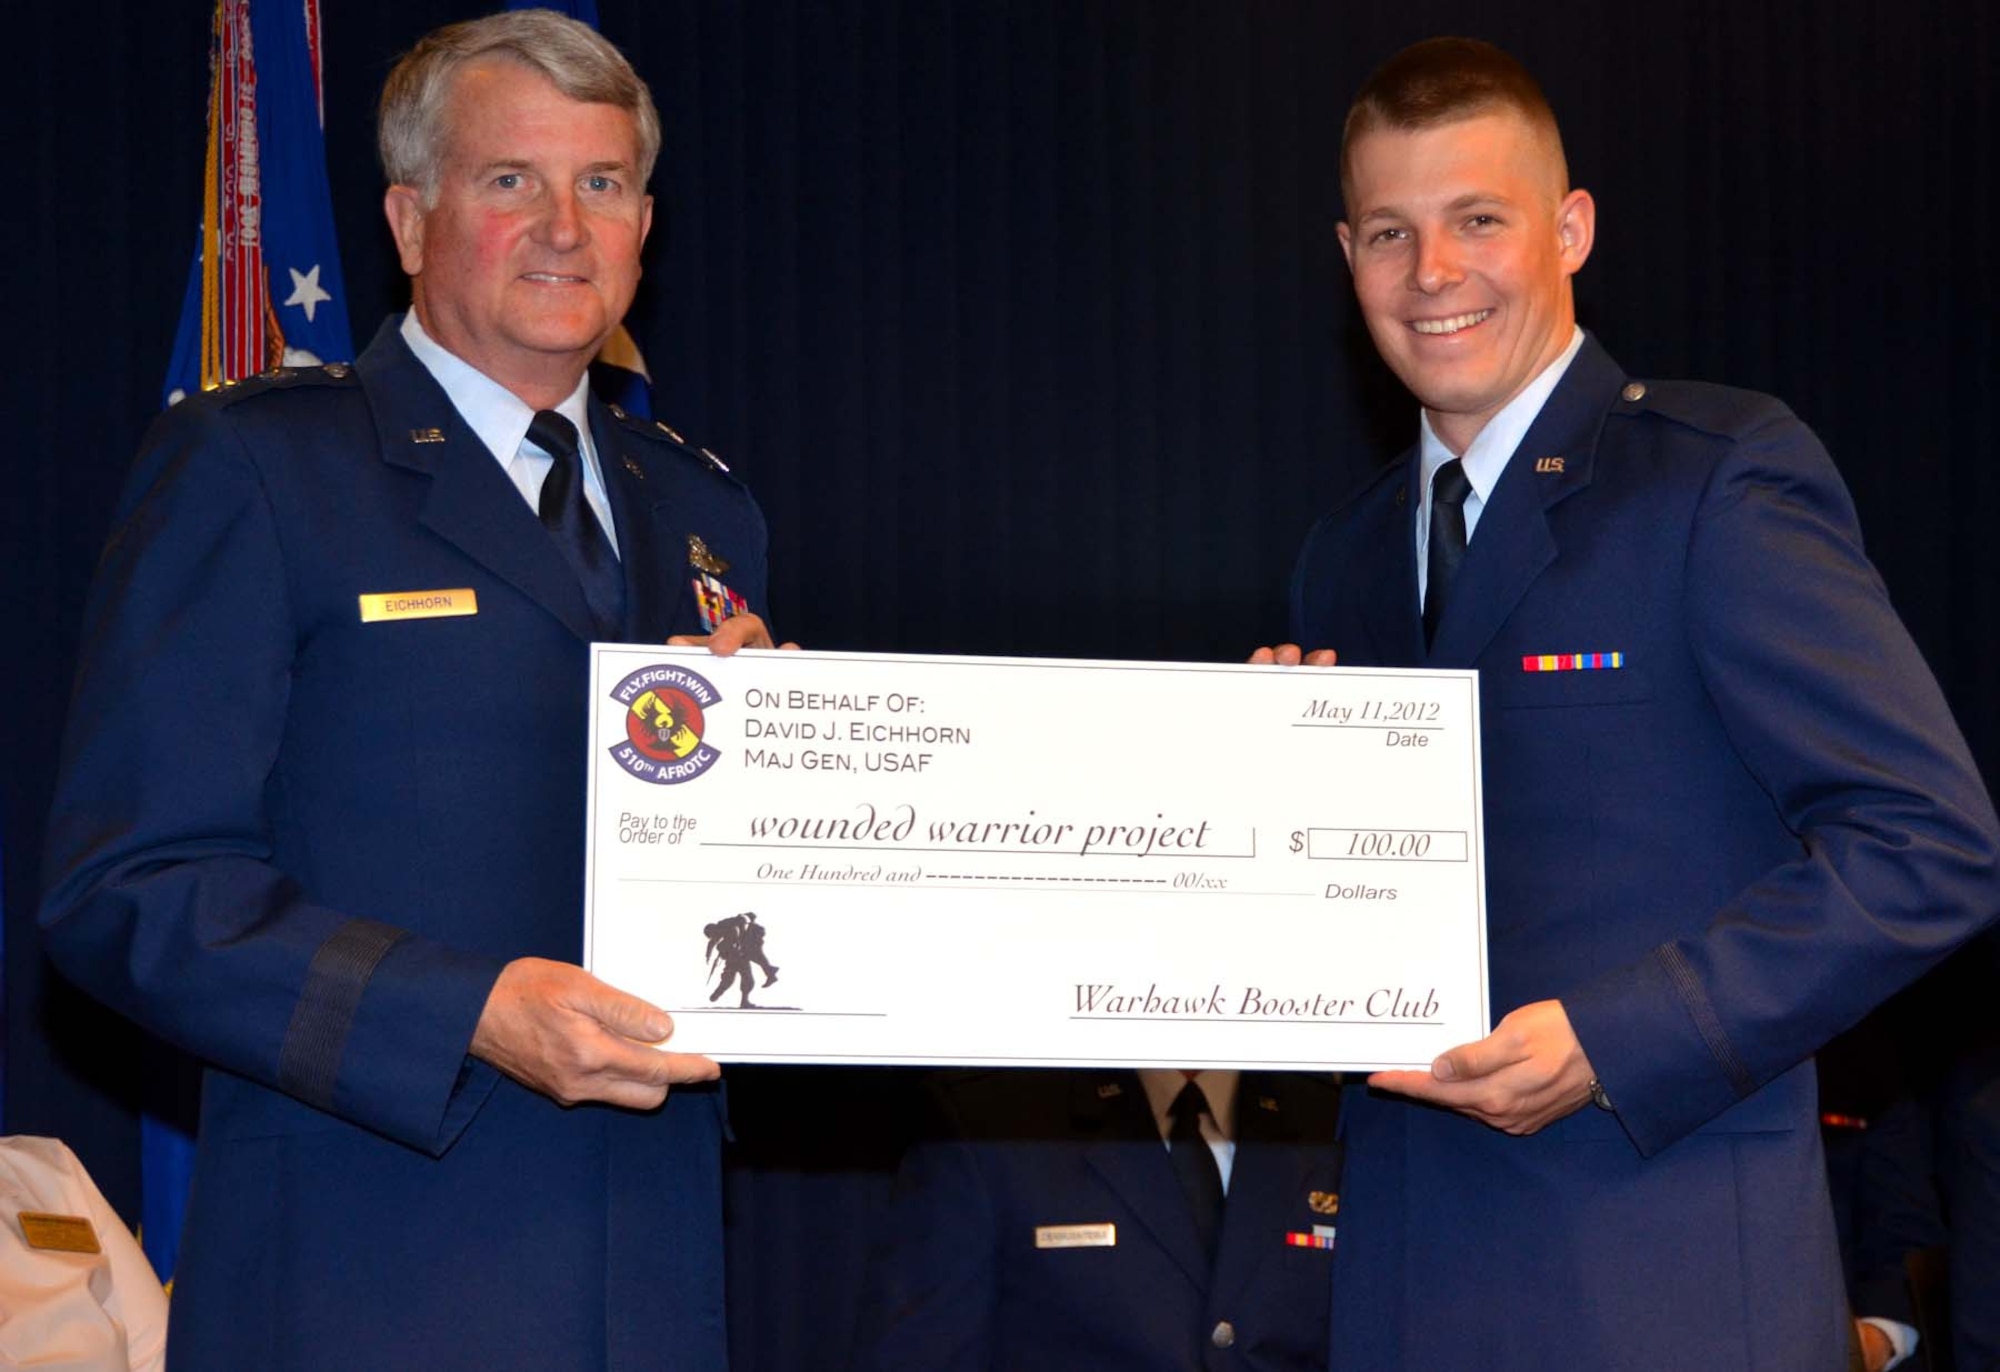 Cadet Eric Estvanko, from the University of New Mexico Air Force ROTC Detachment 510, presents guest speaker Maj. Gen. David J. Eichhorn, Air Force Operational Test and Evaluation Center Commander, a donation to the Wounded Warriors Project in his name in appreciation for attending and speaking at the May 11, 2012 UNM Air Force commissioning ceremony held at AFOTEC headquarters on Kirtland AFB, N.M.